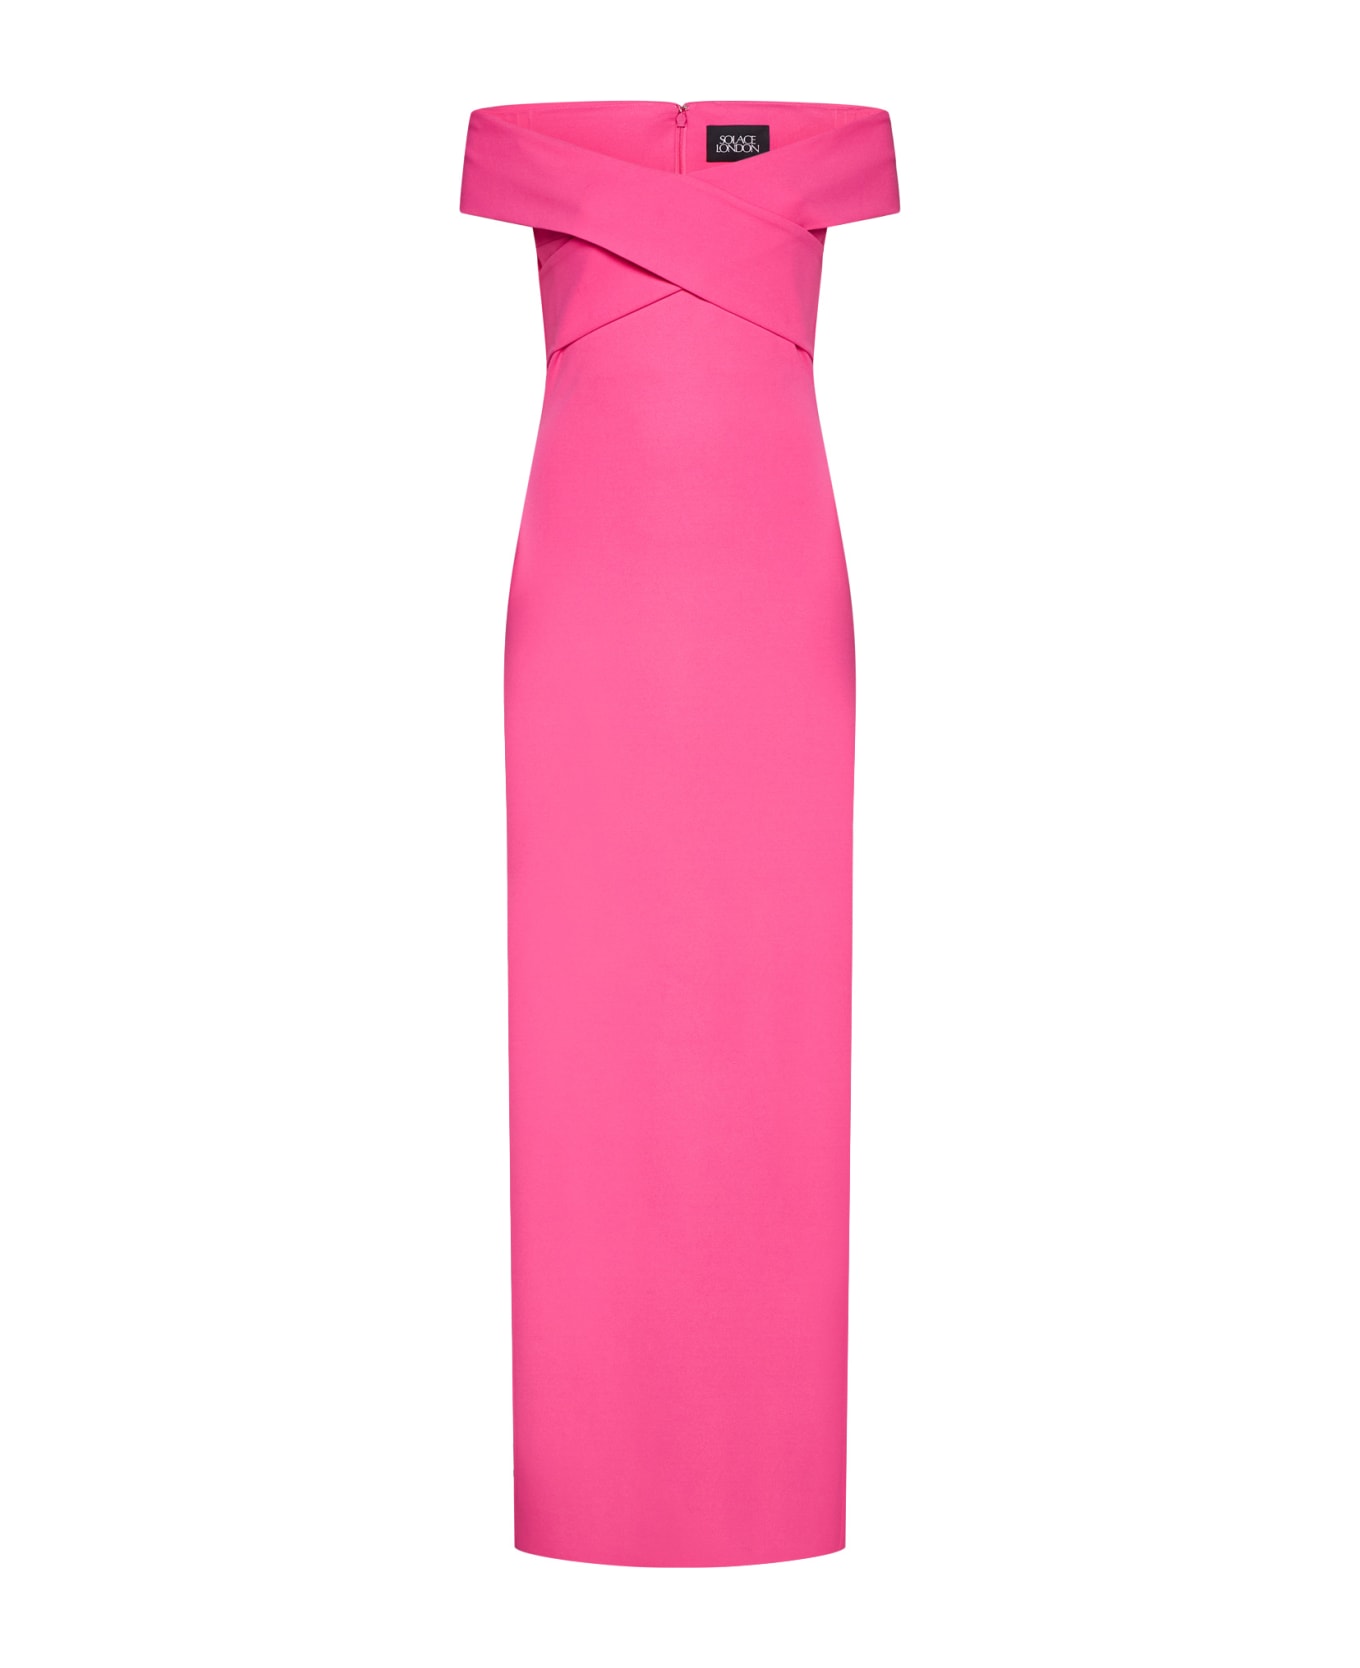 Solace London Ines Maxi Dress - Ultra pink